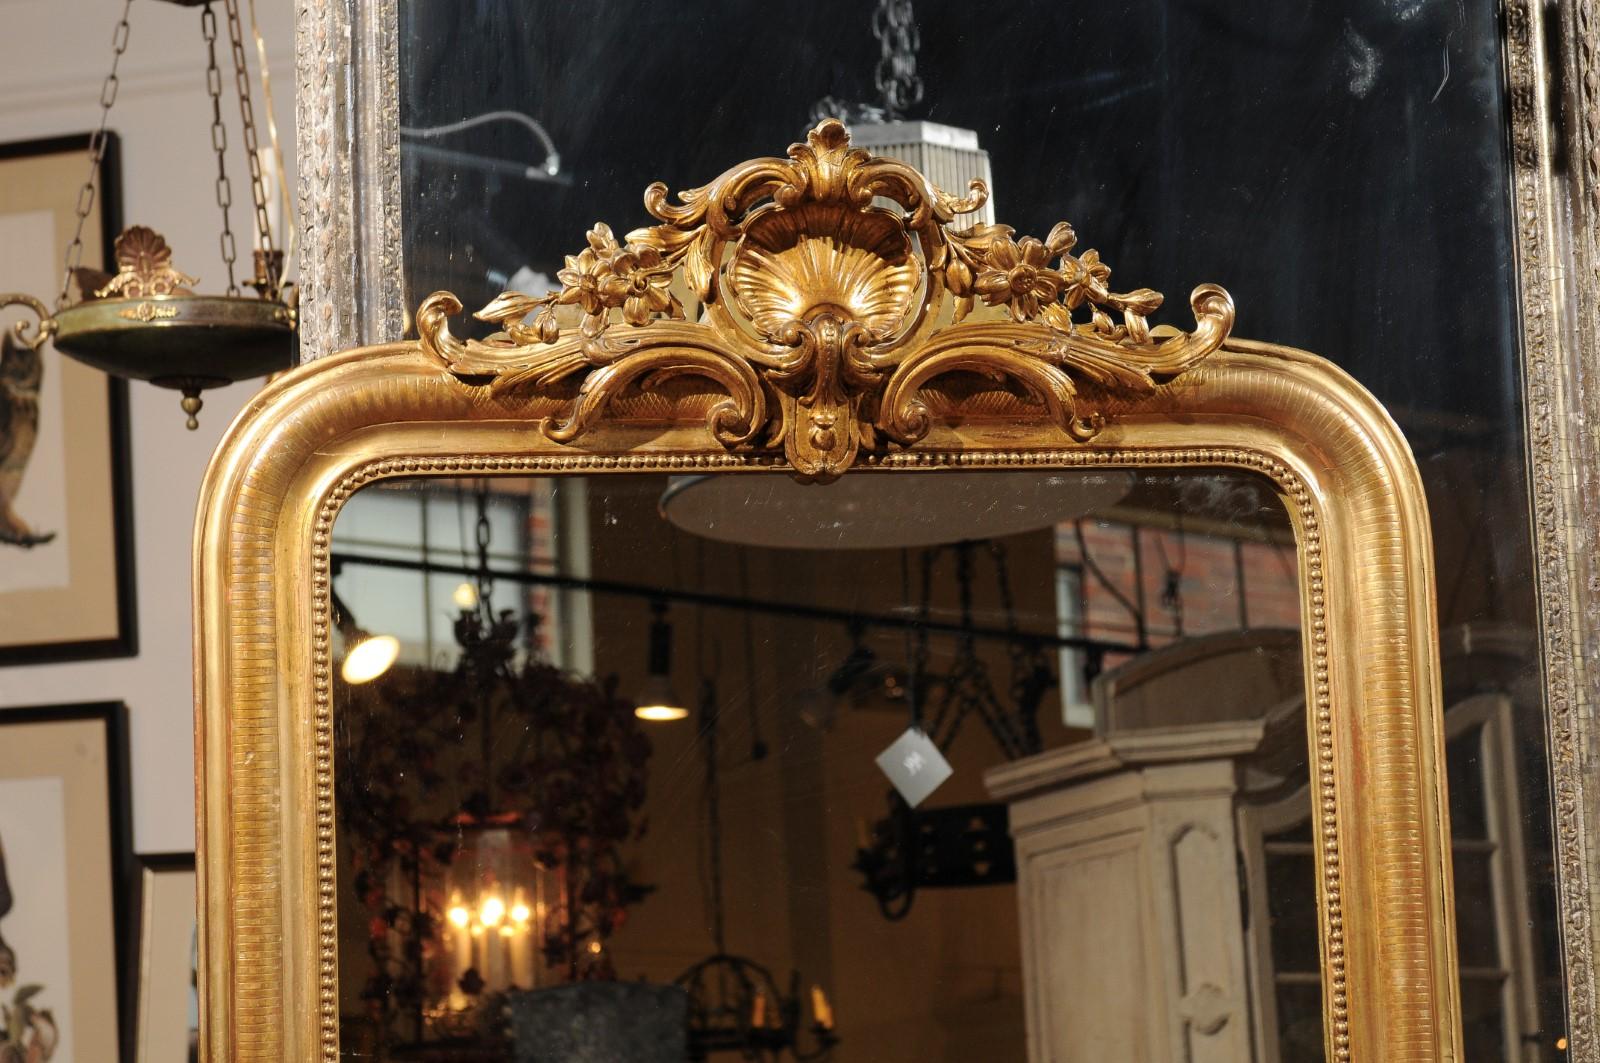 French 19th Century Crested Gilt Louis-Philippe Mirror with Shell and Flowers (19. Jahrhundert)